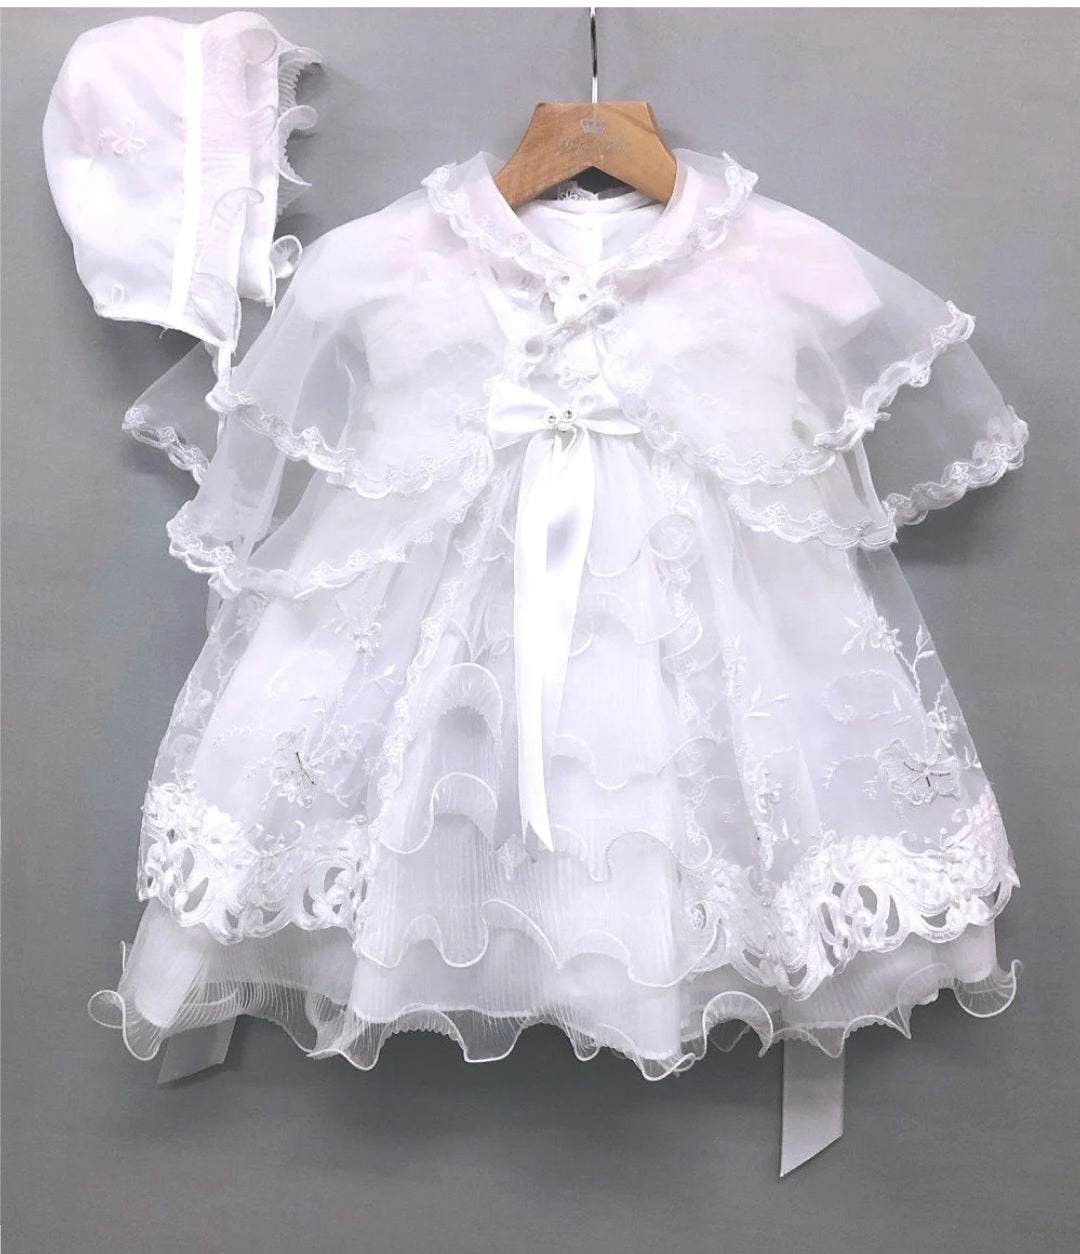 Christening dress with matching cape, lace and ribbon detail 7123